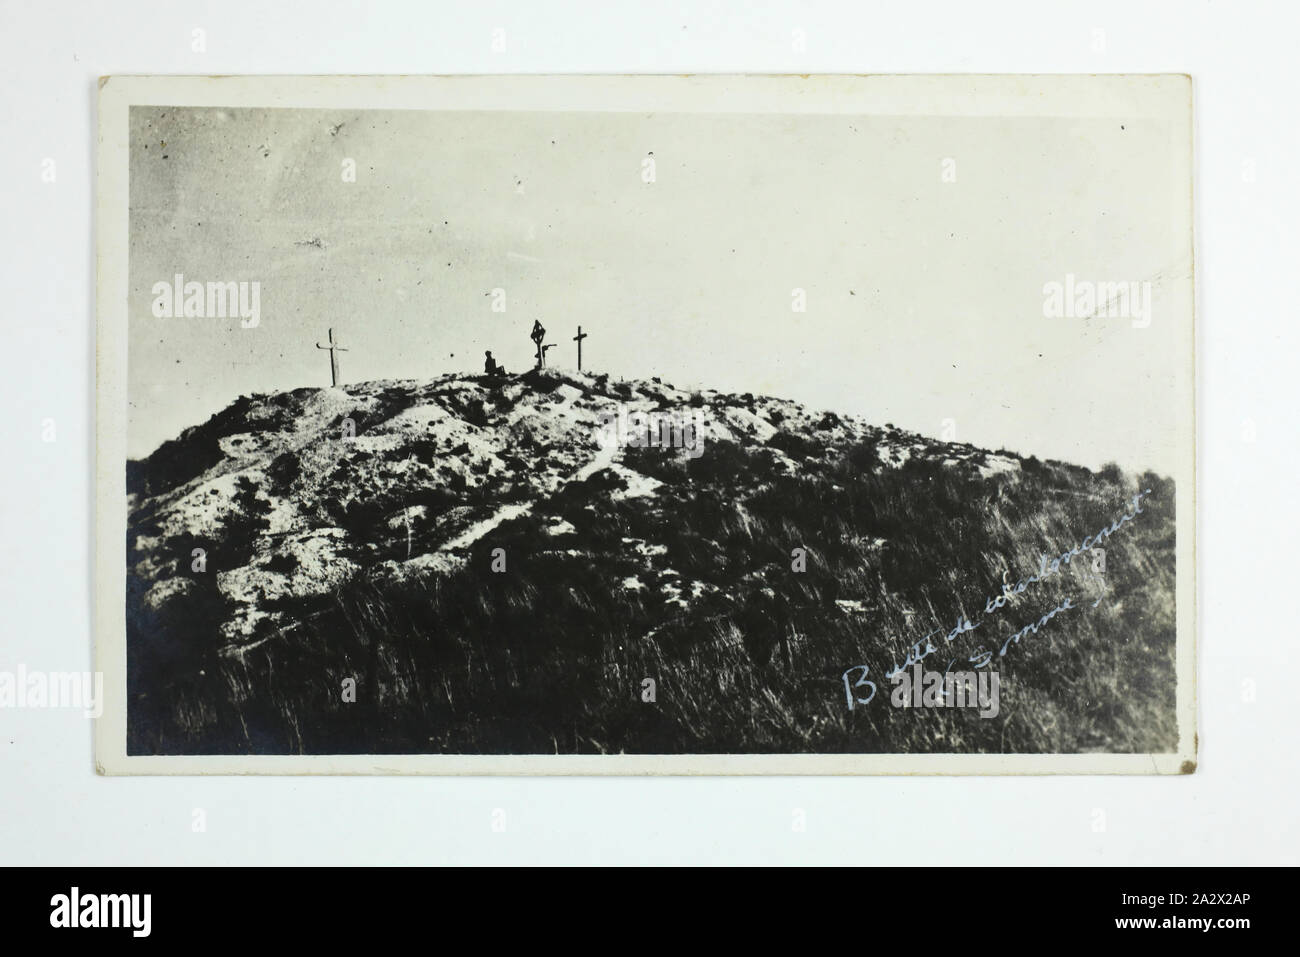 Photograph - 'Butte de Warlencourt', Somme, France, World War I, Jul-Aug 1916, Crosses marking World War I graves in the ancient burial mound of Butte de Warlencourt, off the Albert-Bapaume road in the Somme region of northern France. One of 98 black and white photographs contained in a post card album depicting World War I scenes. The images are souvenir post cards of naval and other military forces, prisoner of war camps and various location scenes around Europe Stock Photo